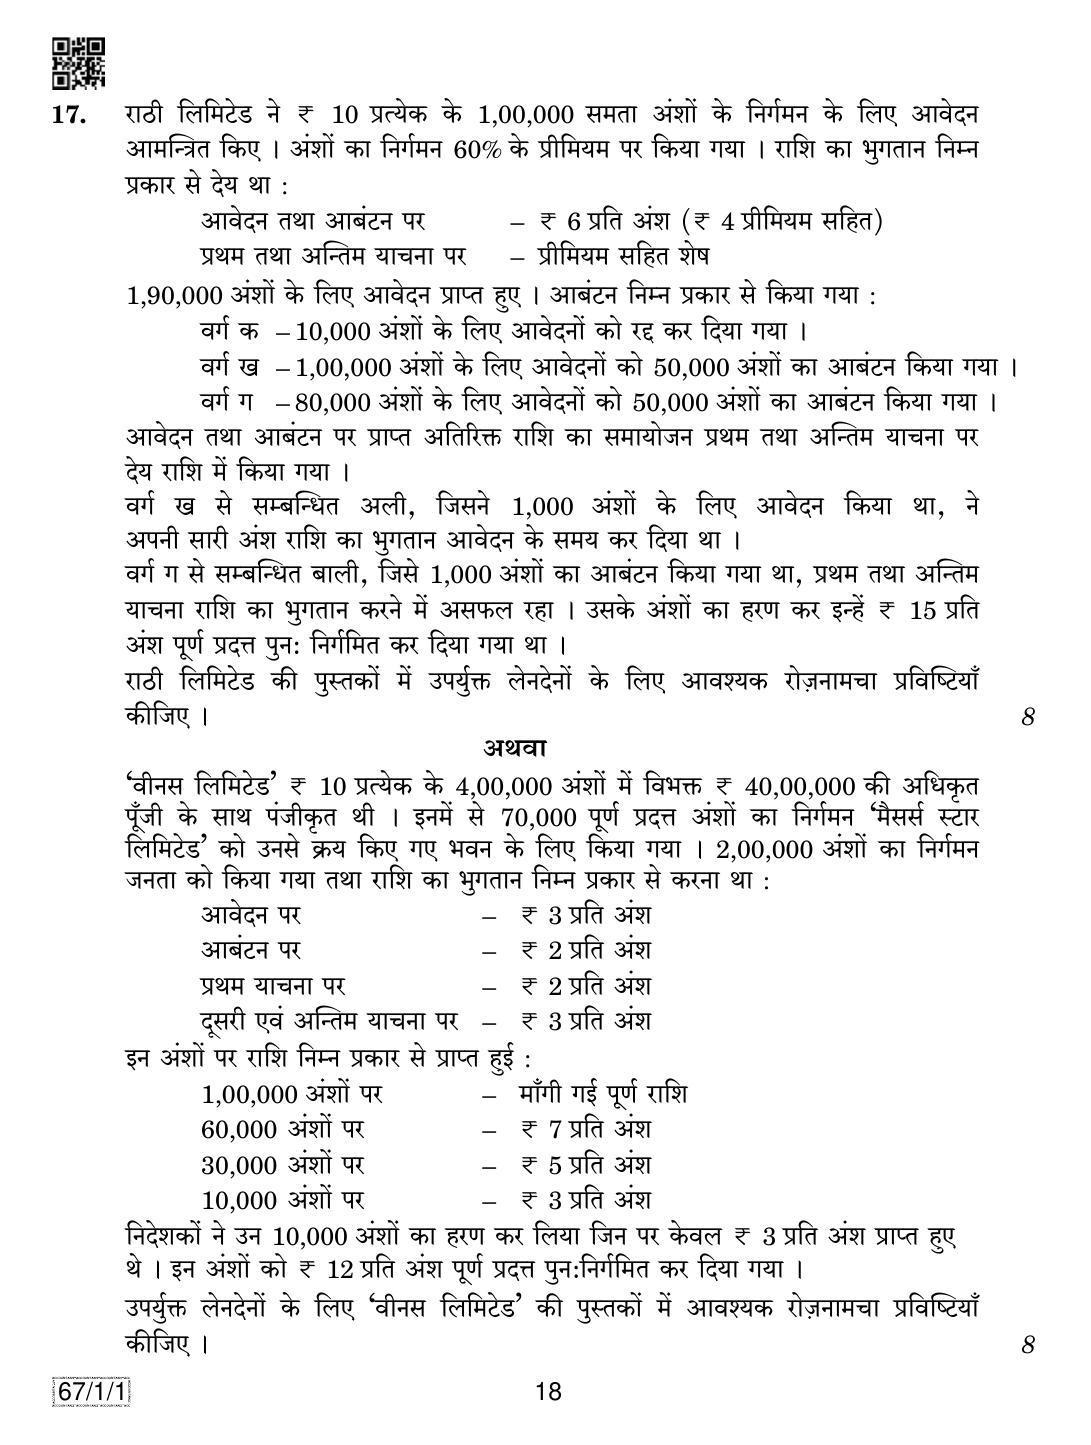 CBSE Class 12 67-1-1 ACCOUNTANCY 2019 Compartment Question Paper - Page 18